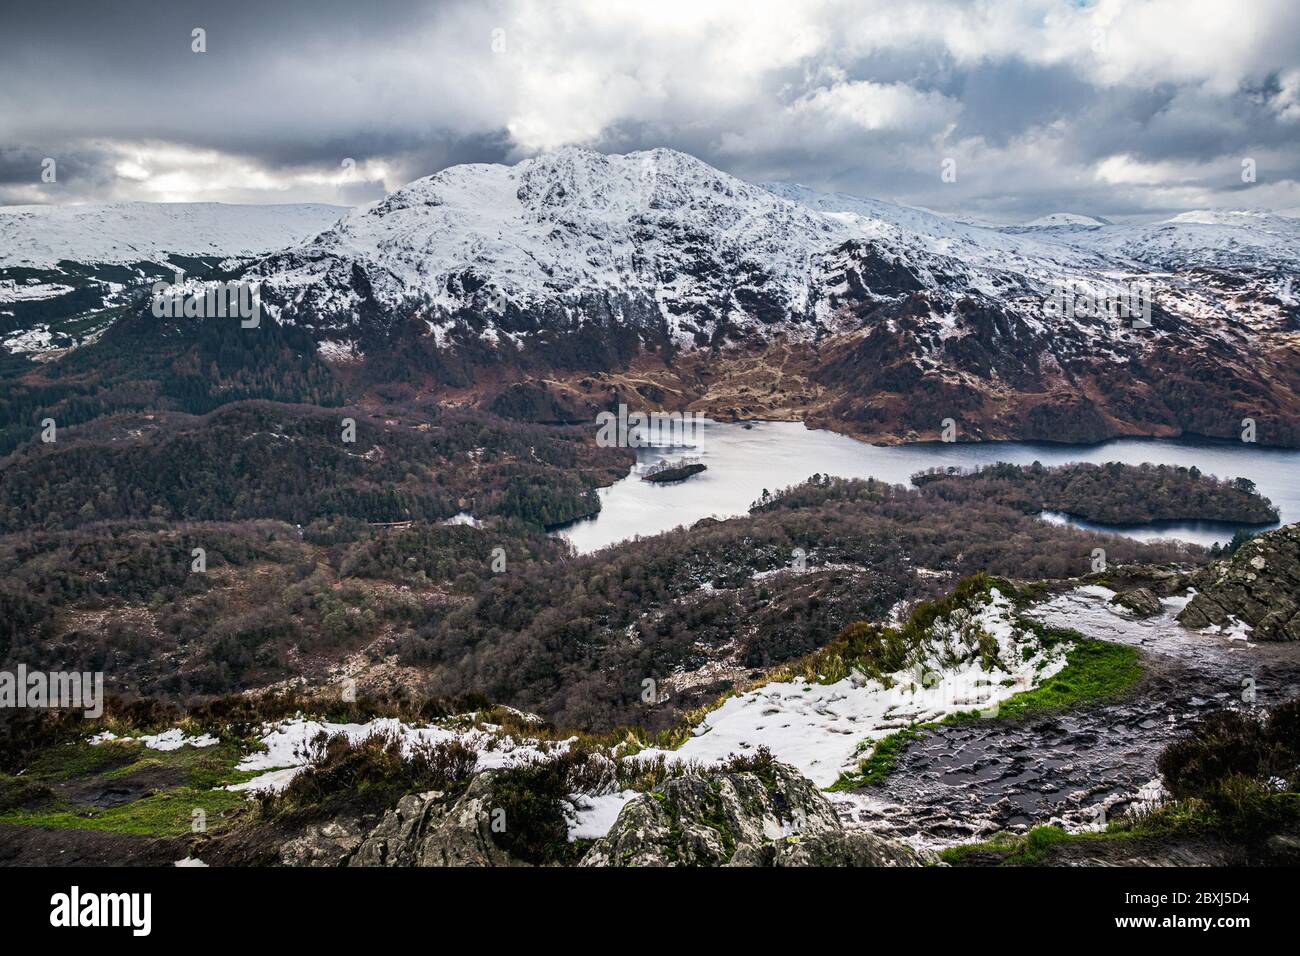 Winter Scottish view from Ben A'an overlooking Loch Katrine and snow-capped peak of Ben Venue in Scottish Highlands. Stock Photo